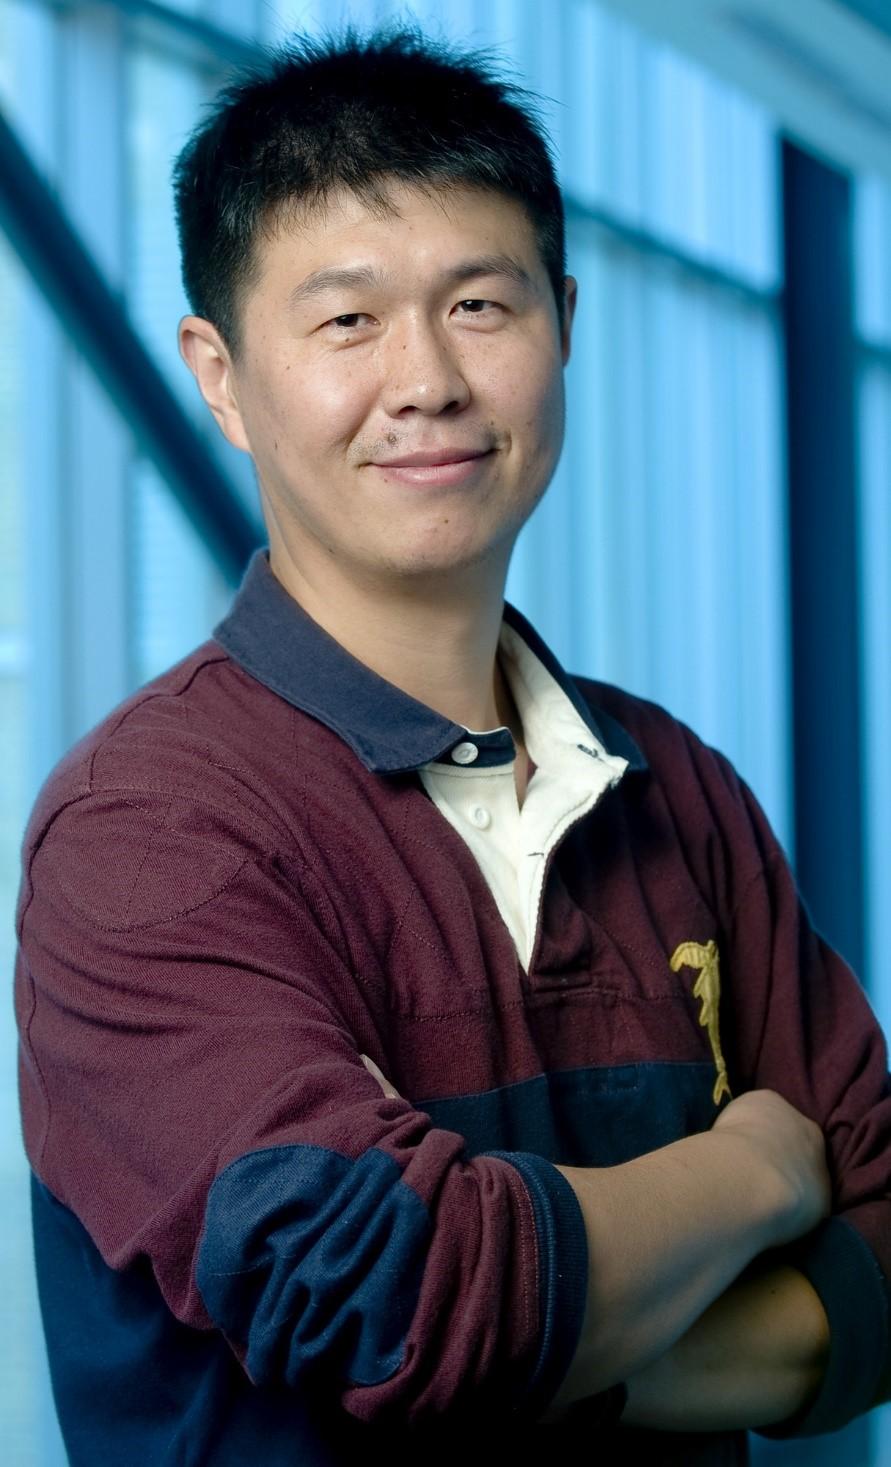 Dr. Xiaowei Teng, Chair of the Department of Chemical Engineering